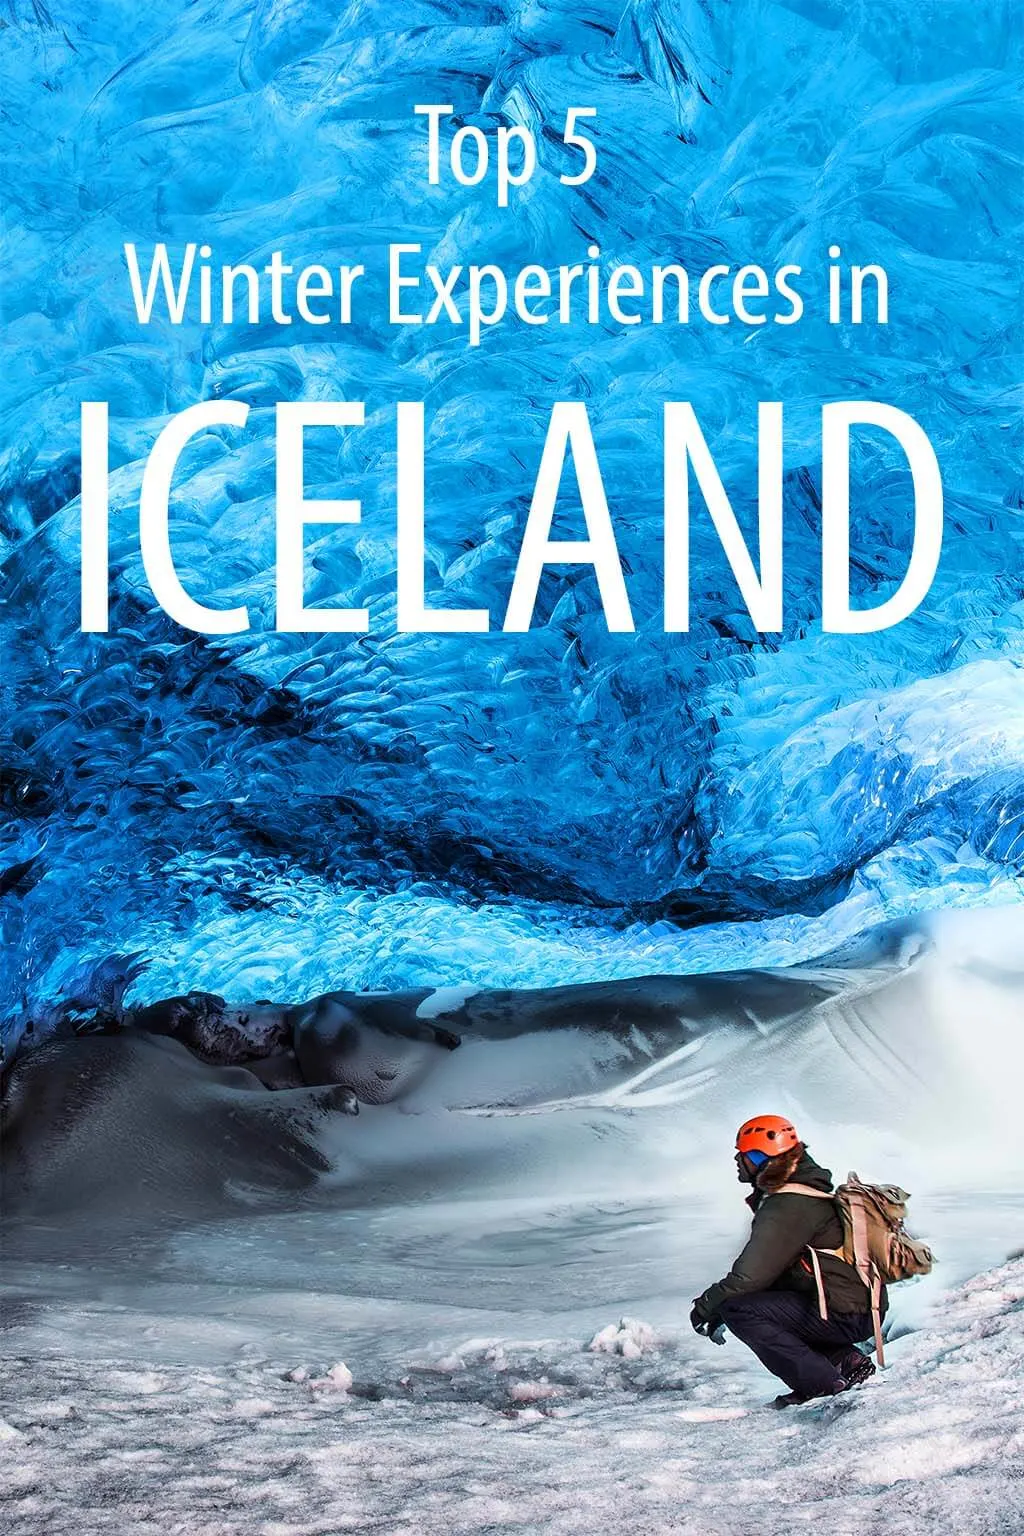 5 incredible winter experiences in Iceland for your bucket list or for the next trip. Wouldn't you travel to Iceland in winter for this?